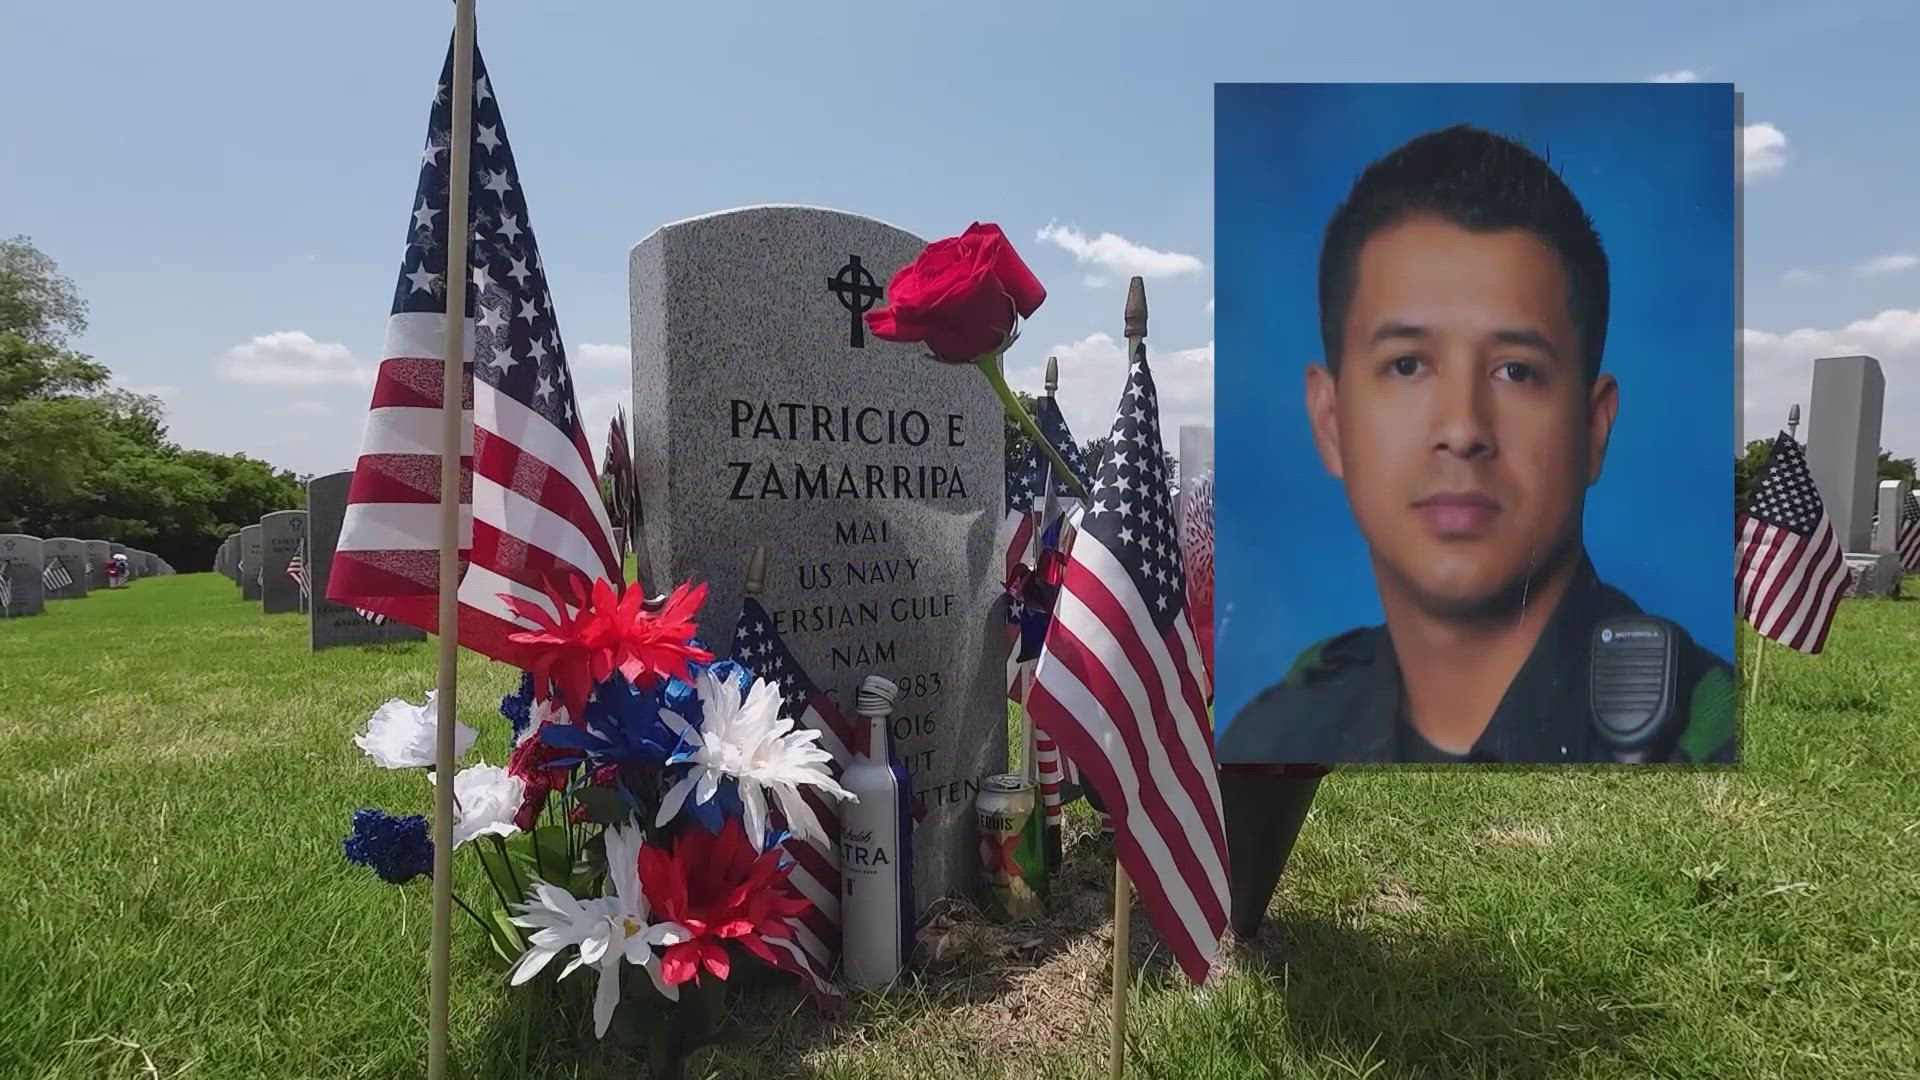 "He loved his country, and he loved his city and he gave his life," said Valerie Zamarippa, whose son Dallas police officer Patrick Zamarippa, was killed in ambush.